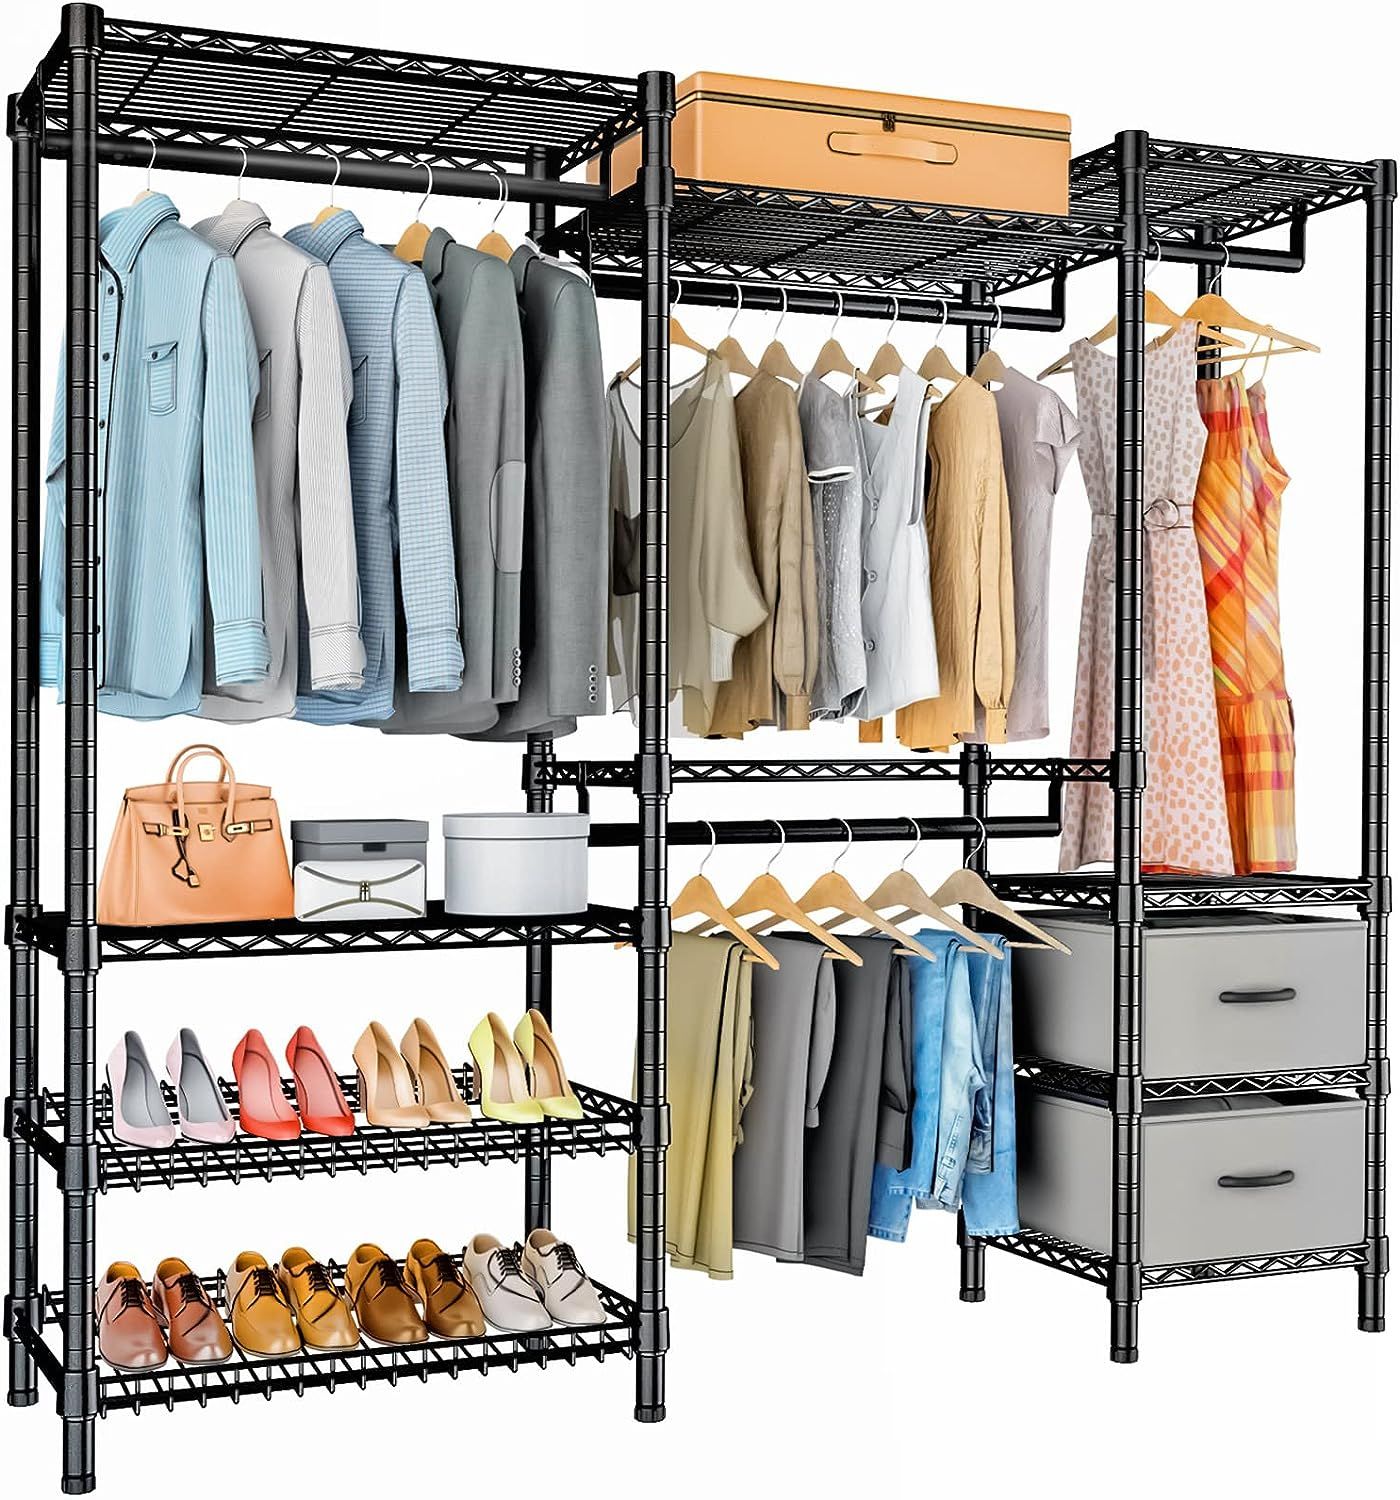 Vipek V8 Wire Garment Rack 5 Tiers Heavy Duty India | Ubuy With Regard To 5 Tiers Wardrobes (Photo 14 of 15)